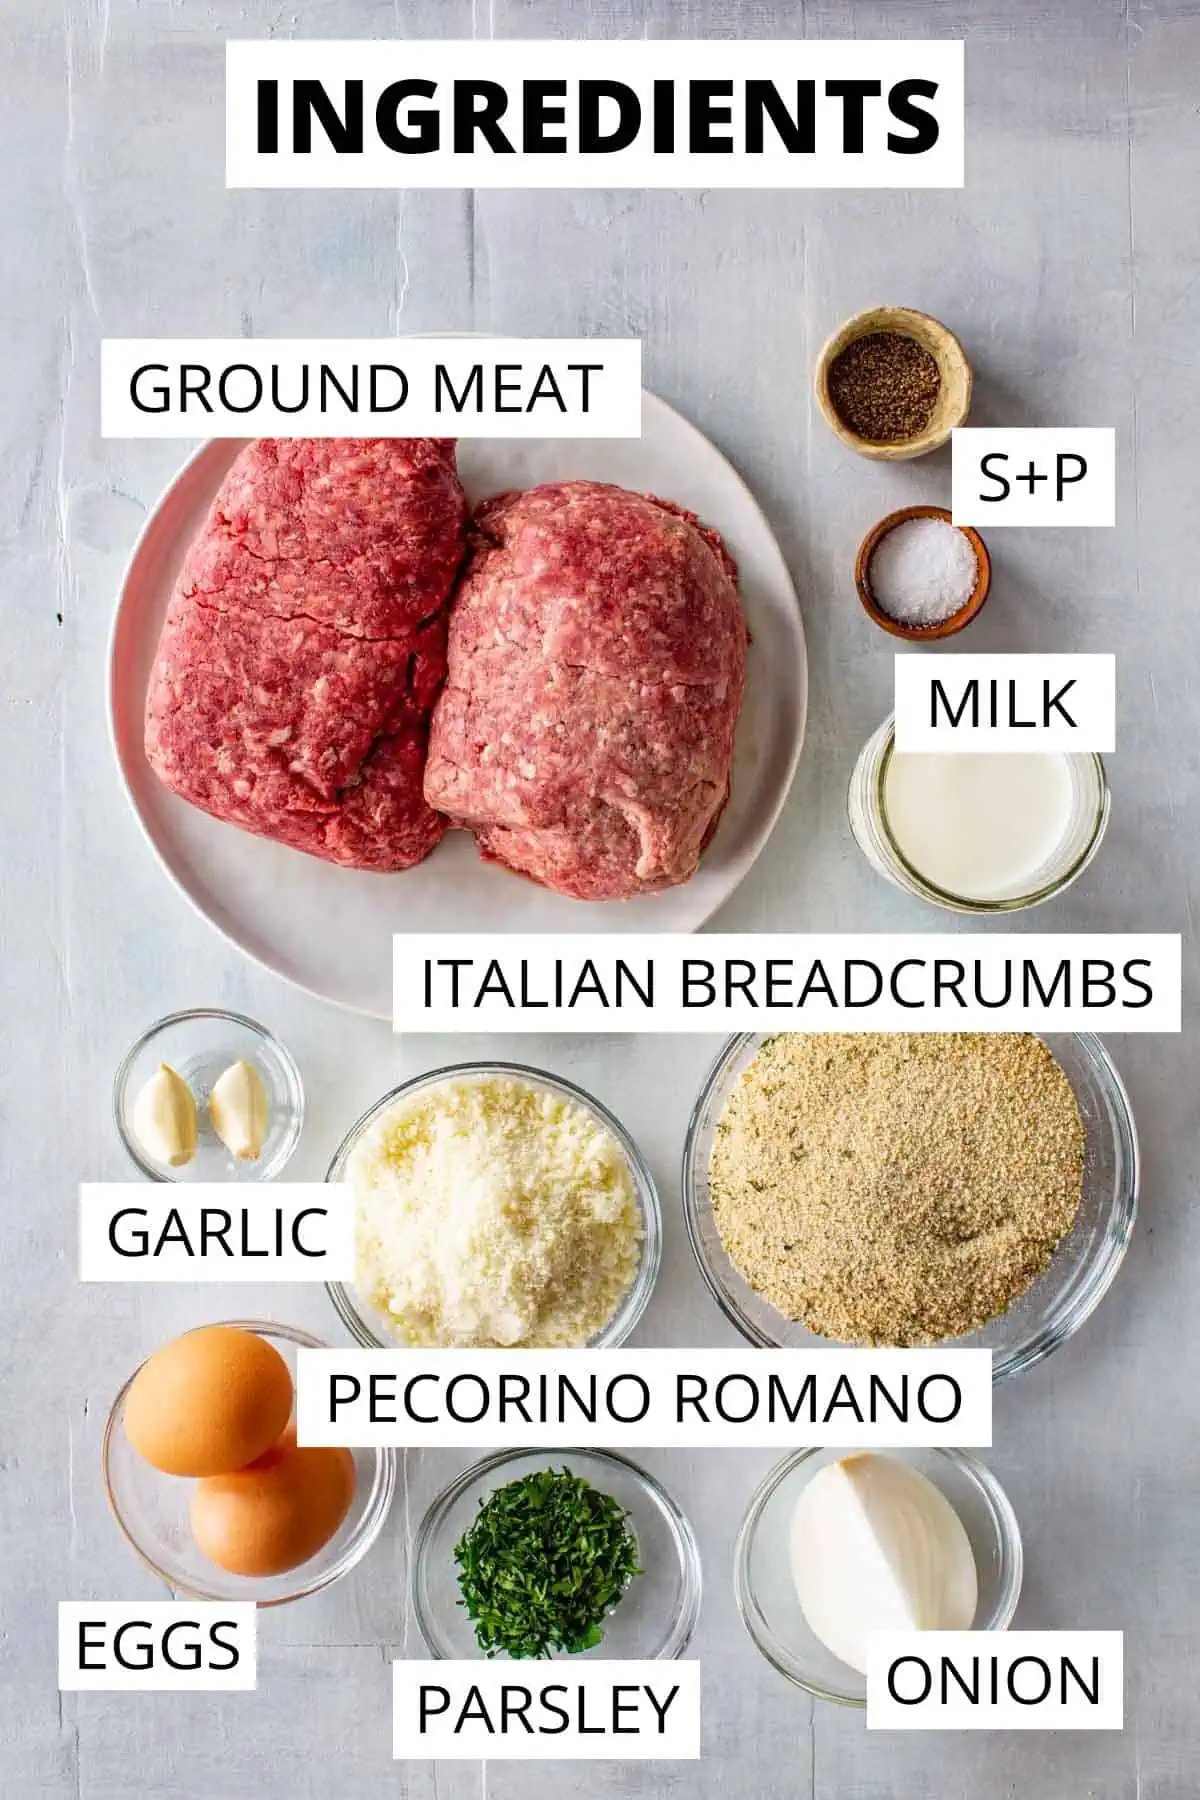 Recipe ingredients including ground meat and other items portioned out in small bowls.